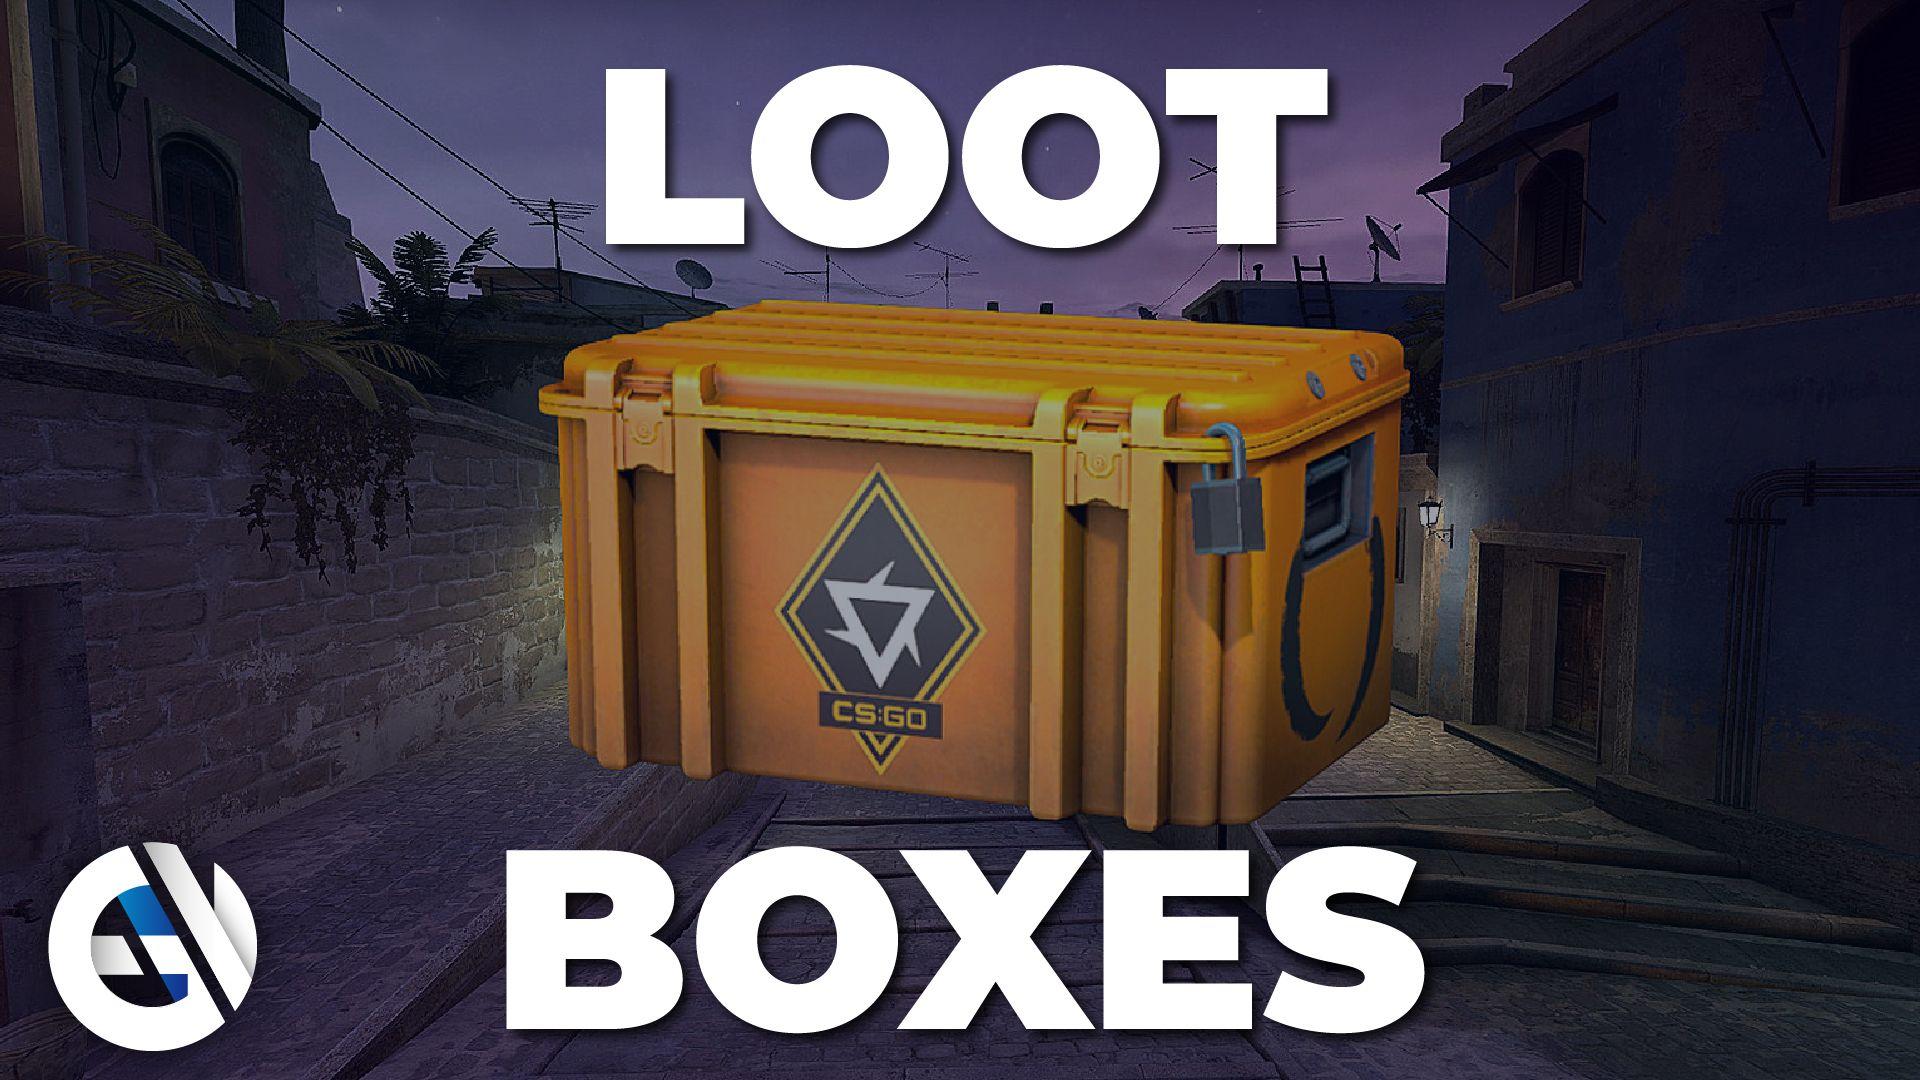 Loot boxes - the new craze in the gaming industry